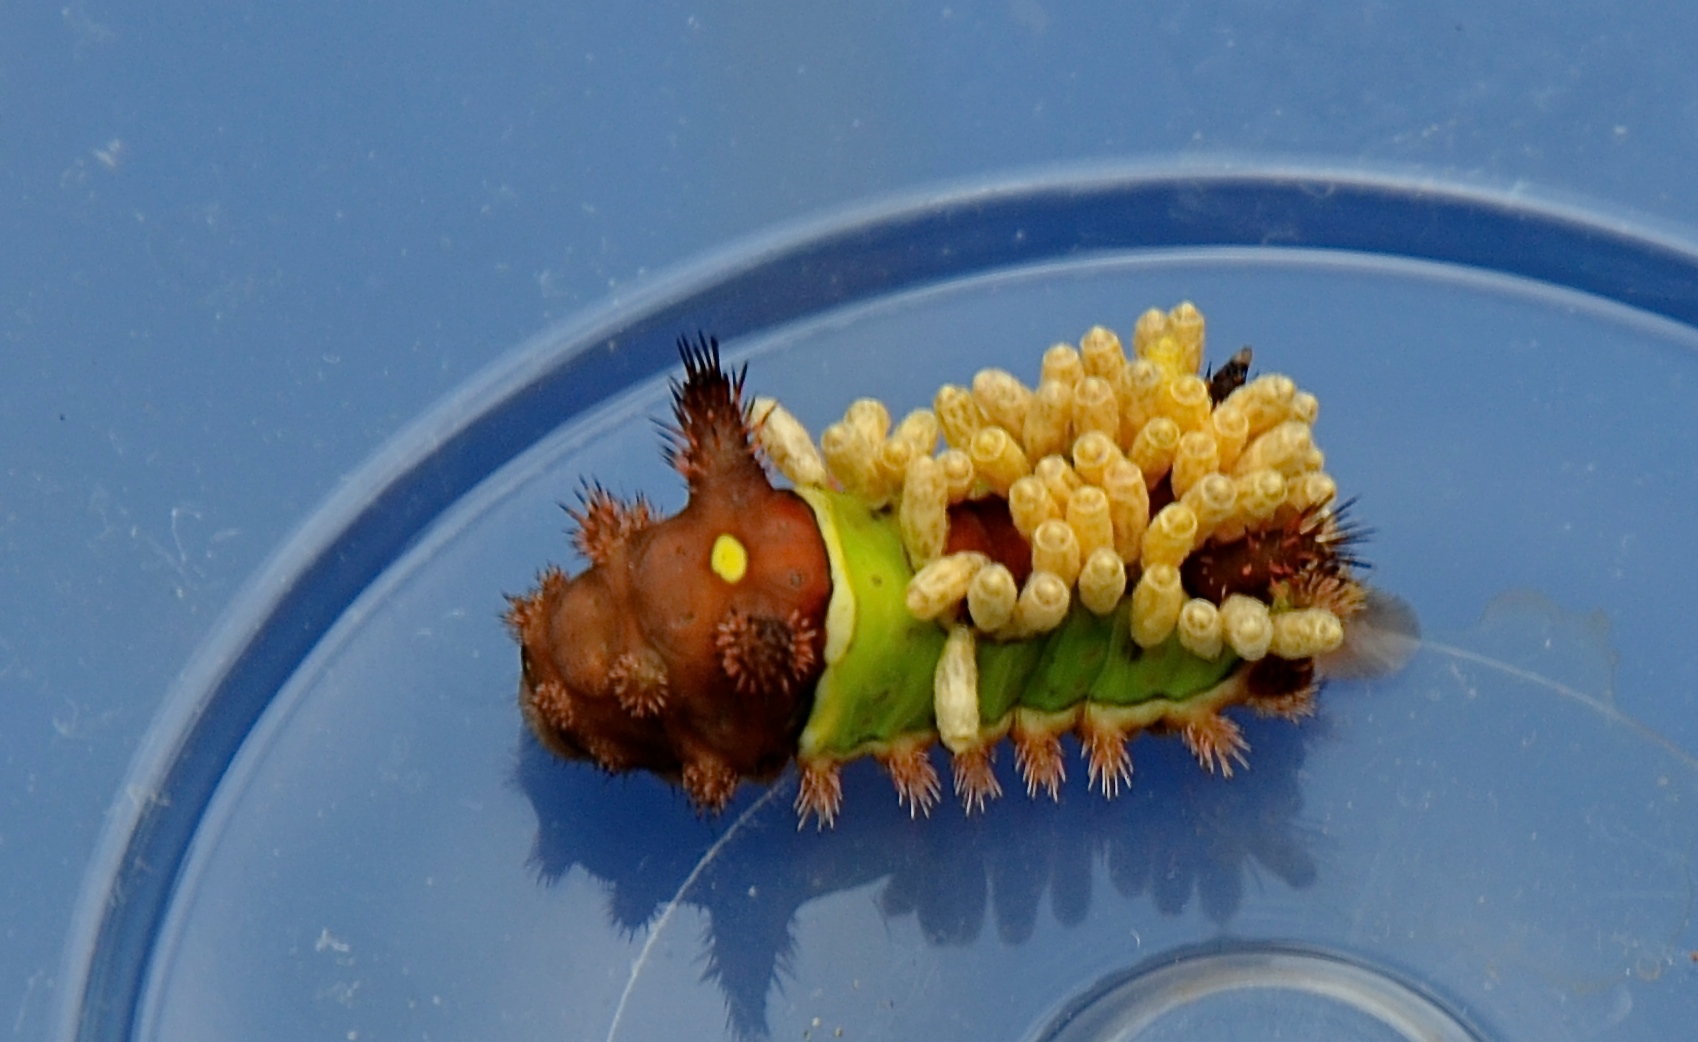 The Saddleback Caterpillar with parasitic wasp cocoons